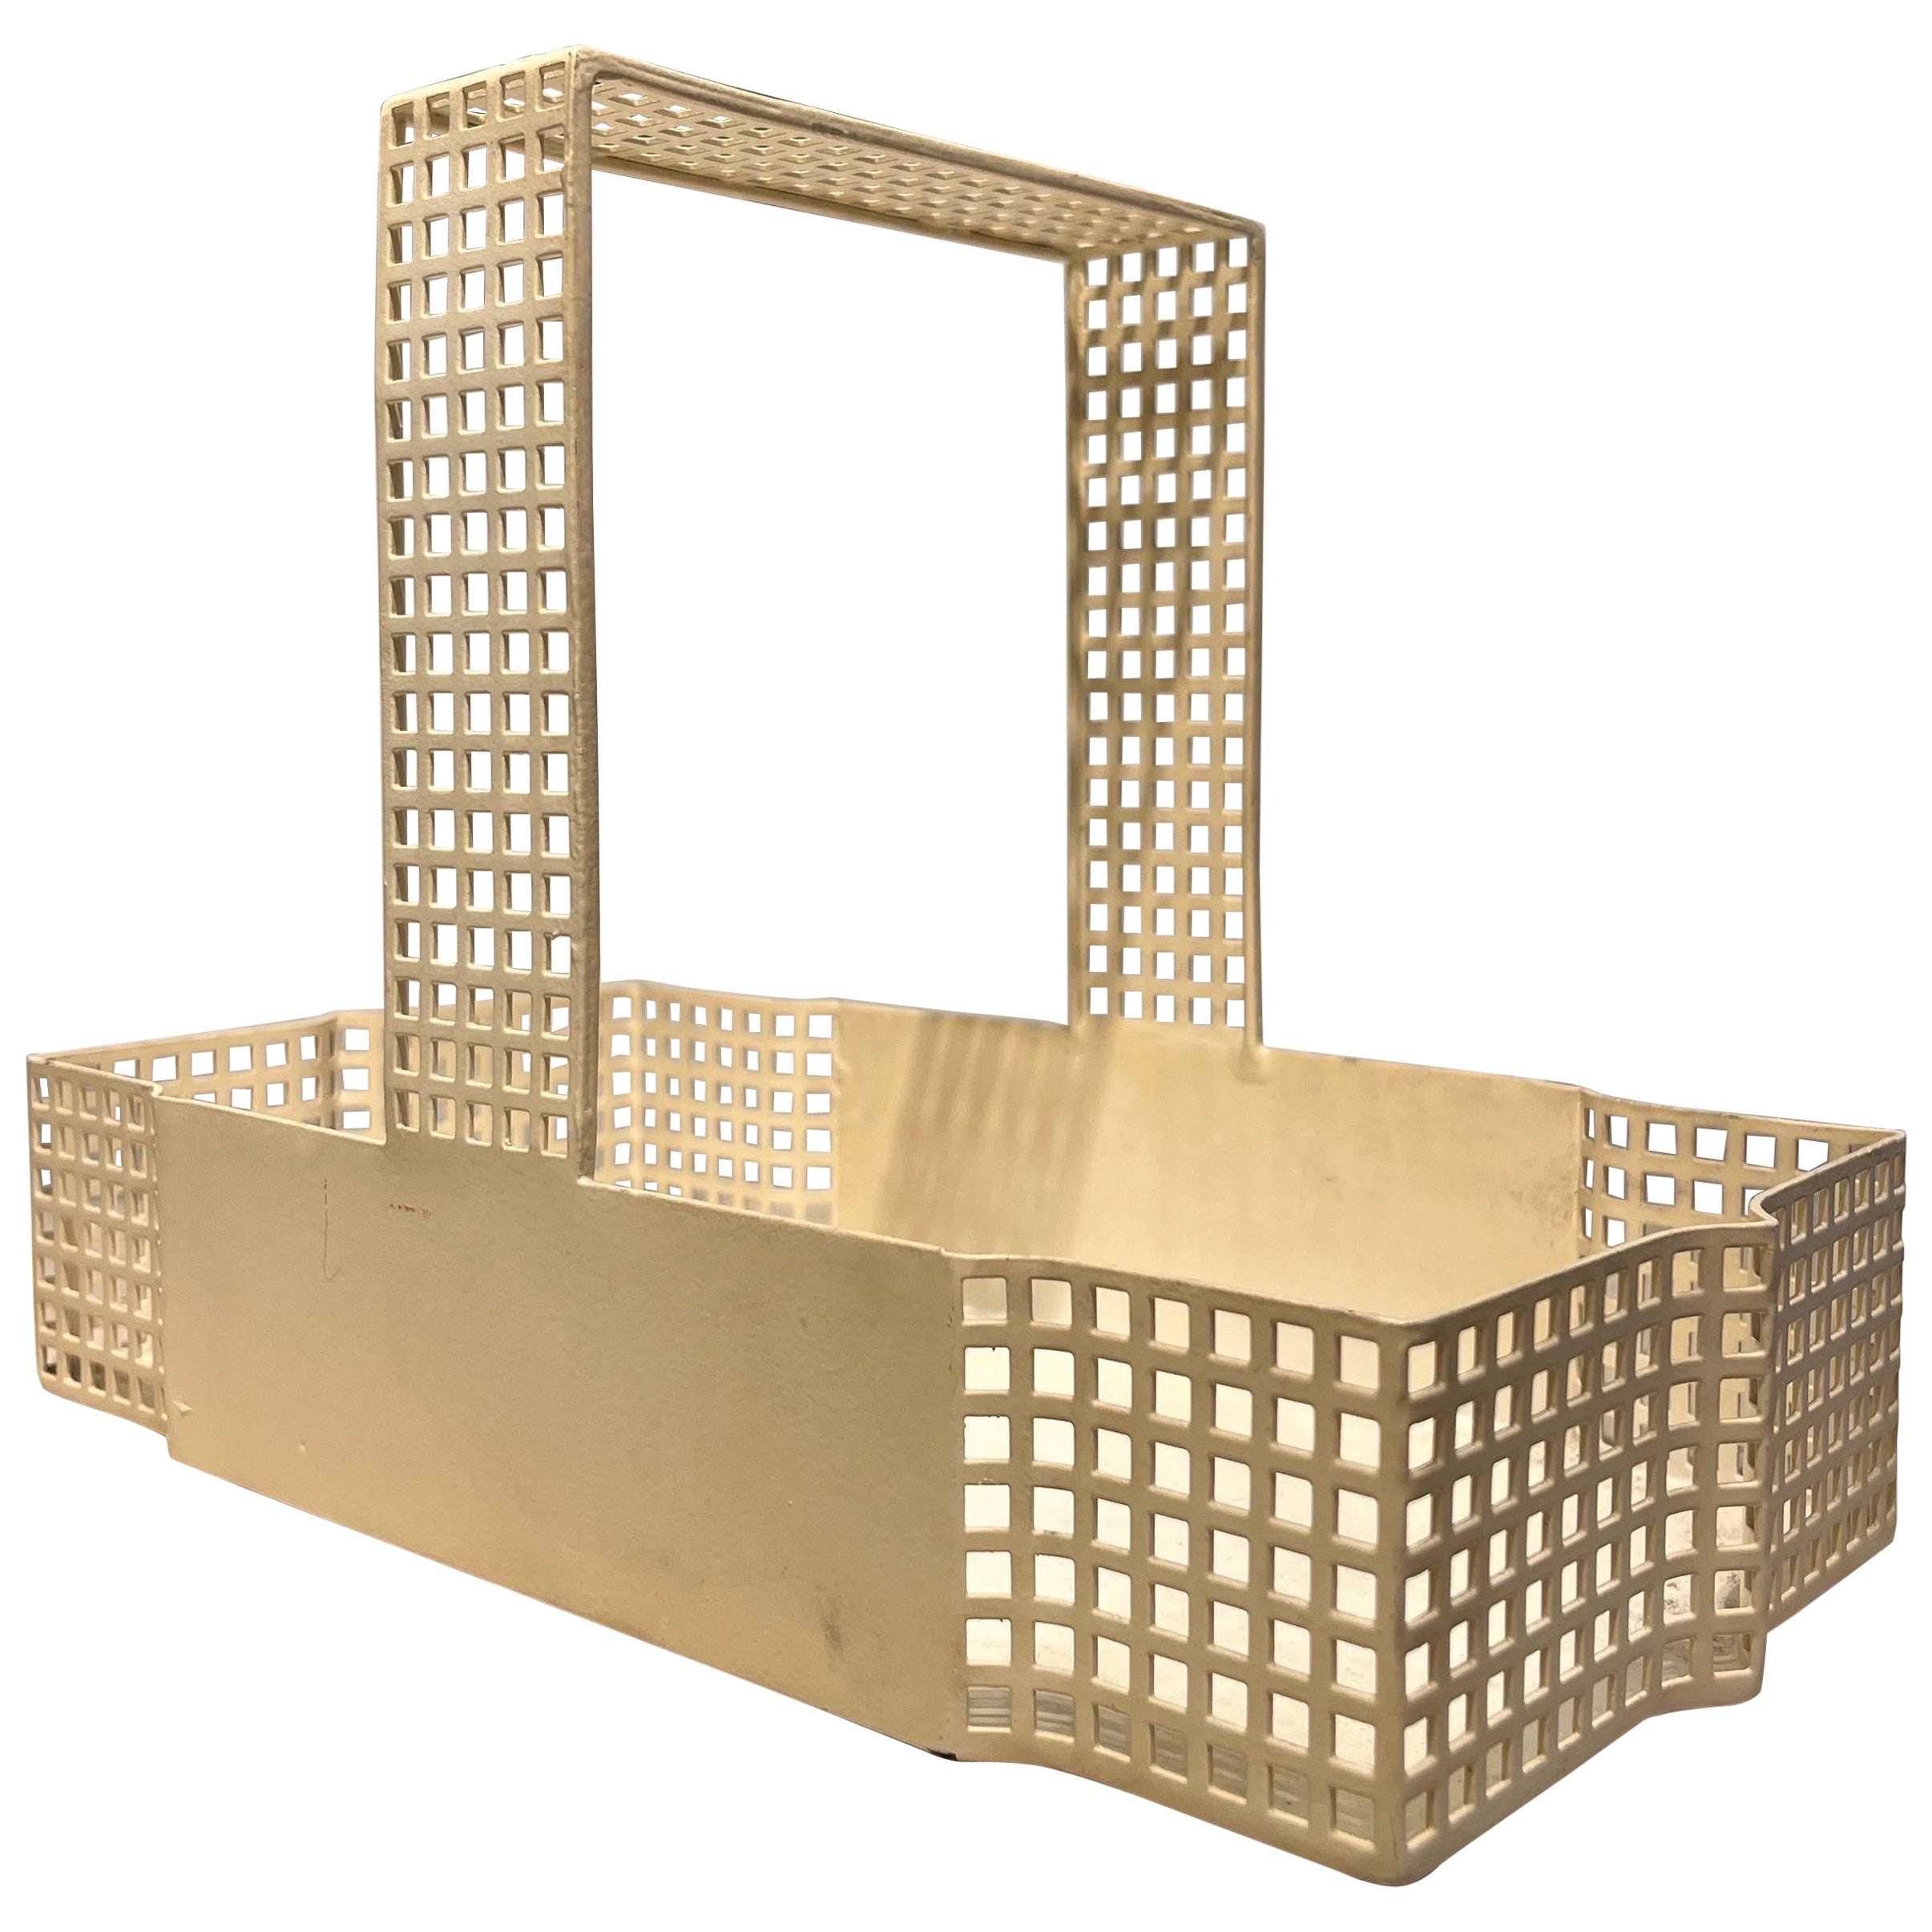 White Lacquered Metal Basket by Josef Hoffman for Bieffeplast, 1980s For Sale